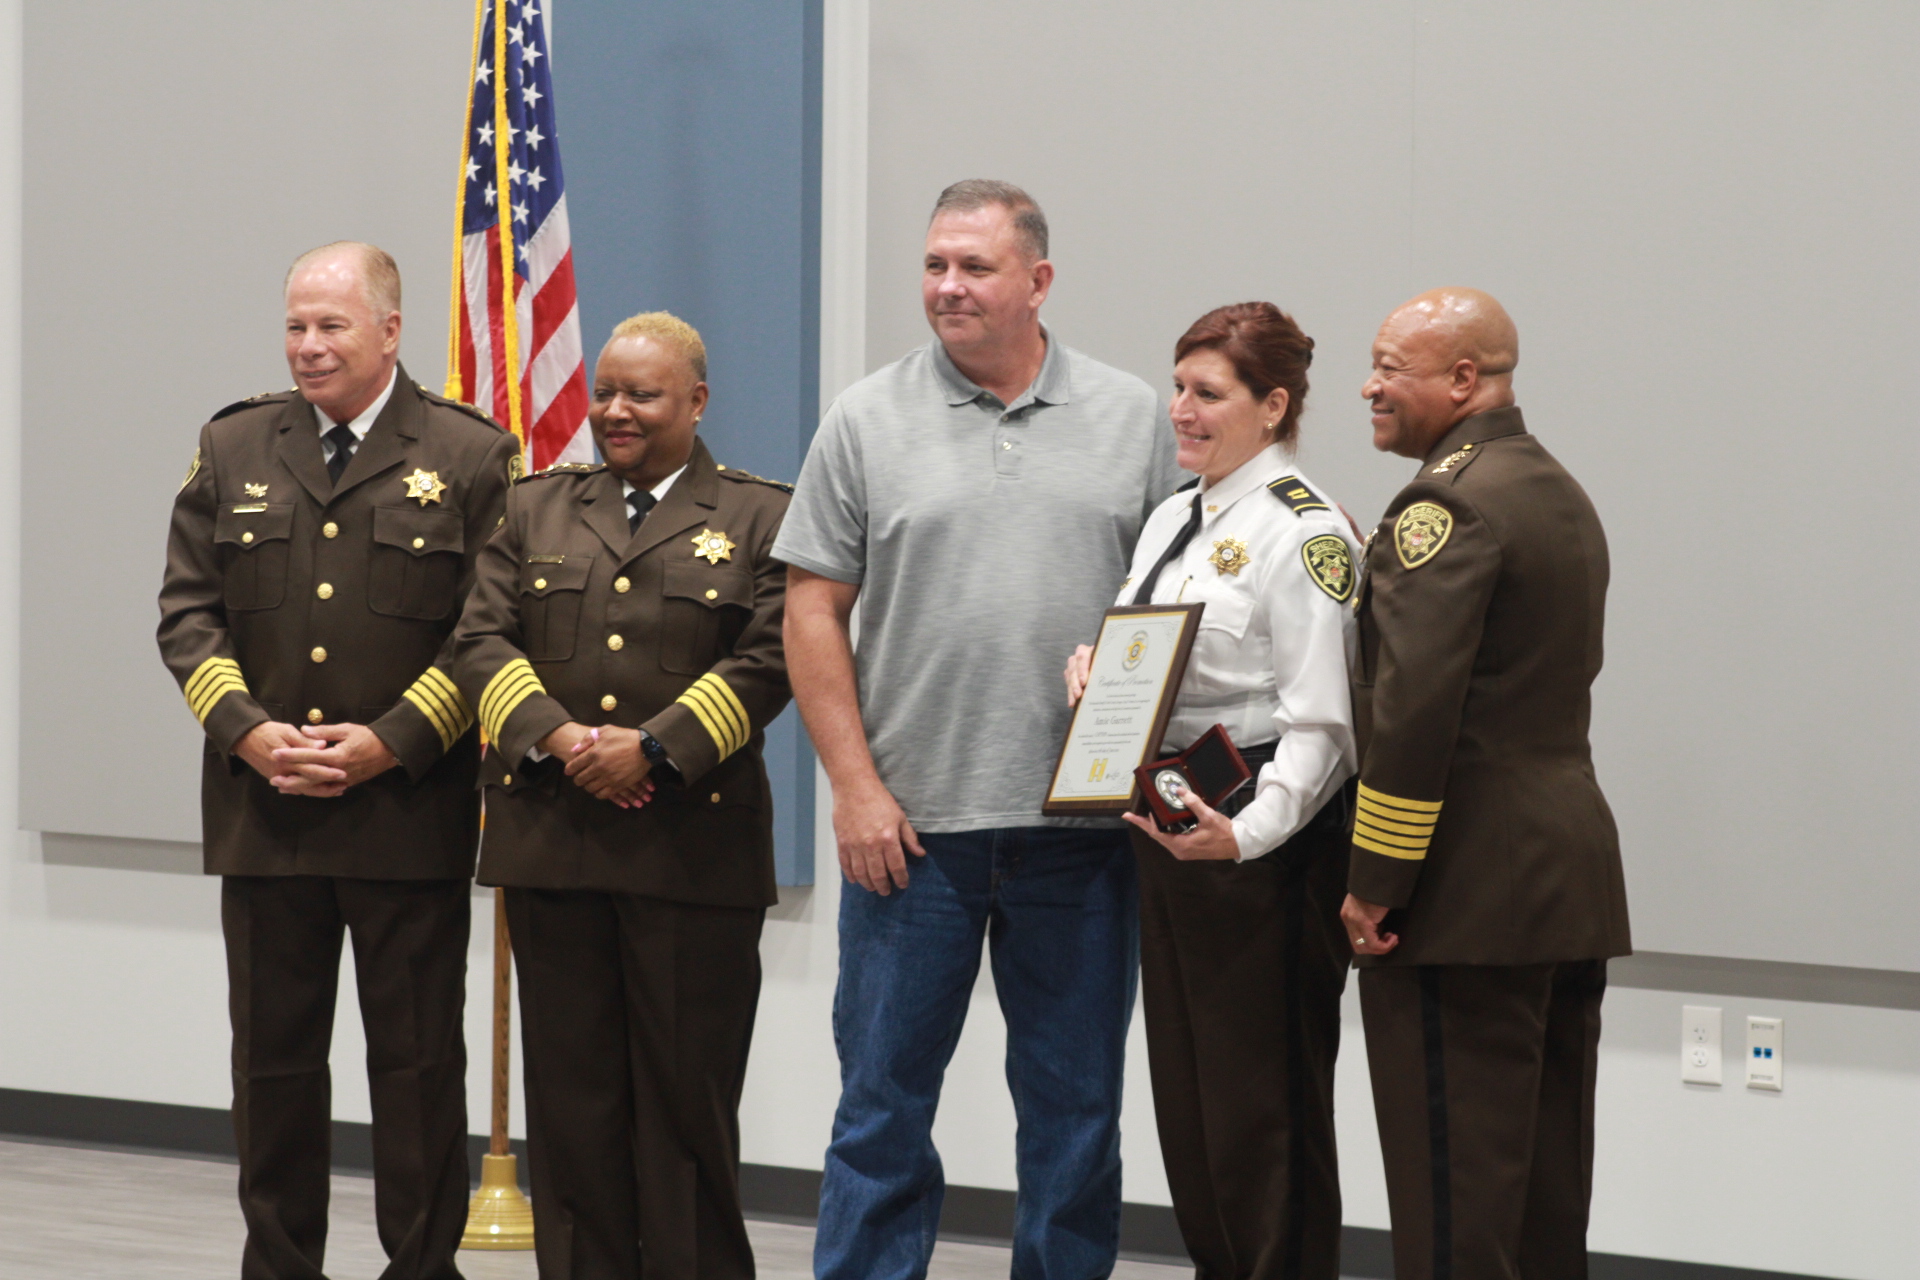 Sheriff Owens brings back rank of captain to Cobb Sheriff's Office